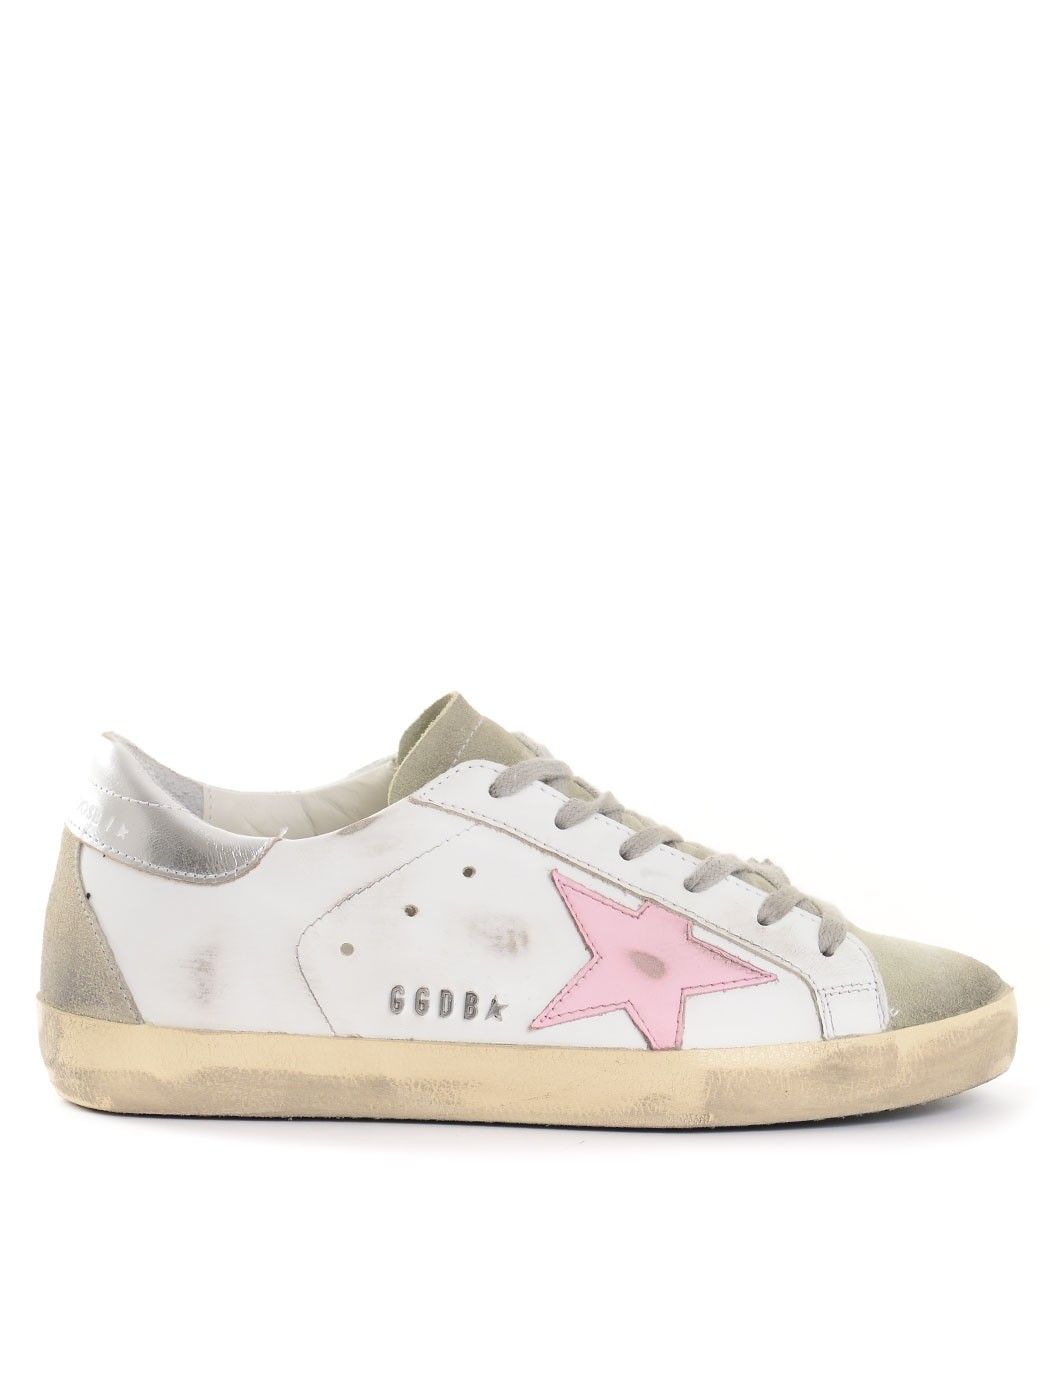  WOMAN SHOES,GIVENCHY SHOES,GOLDEN GOOSE SHOES,MARNI SHOES  GOLDEN GOOSE GWF00102